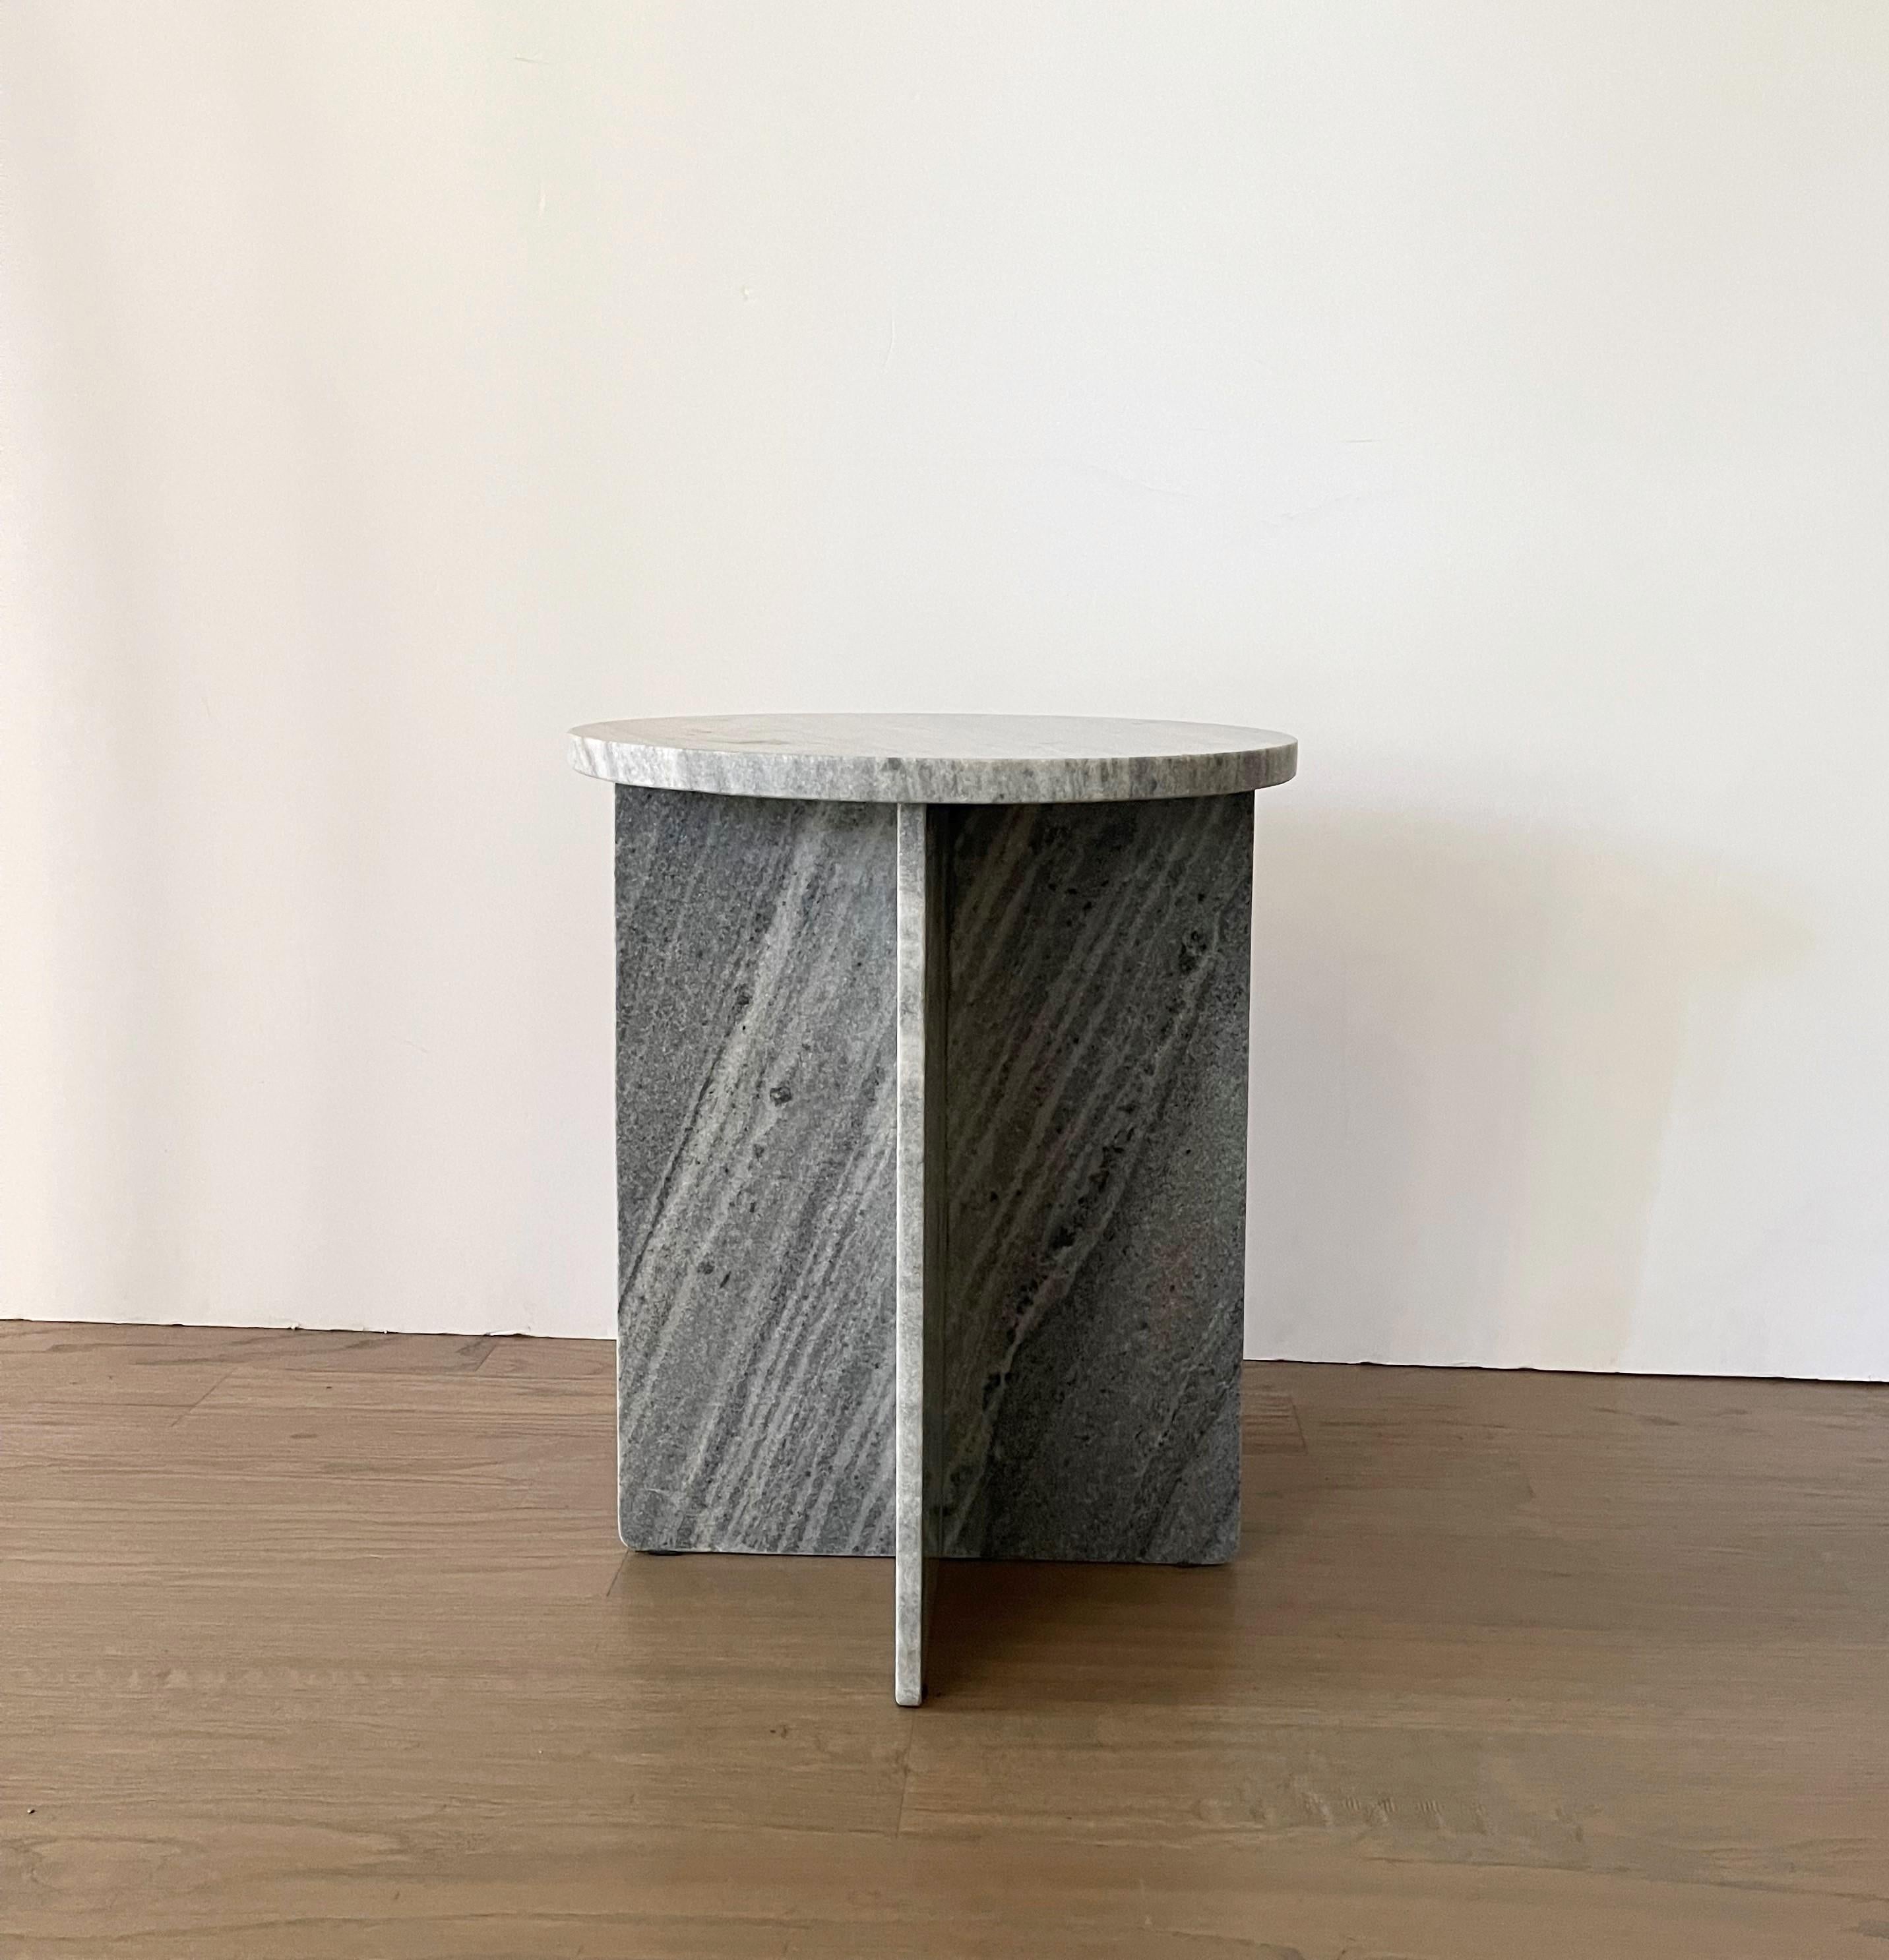 Gorgeous from every angle, crafted from solid marble this side table features a simple geometric silhouette, base made from flat panels making it as much a Minimalist work of art as it is a functional piece of furniture. The thick slab round top